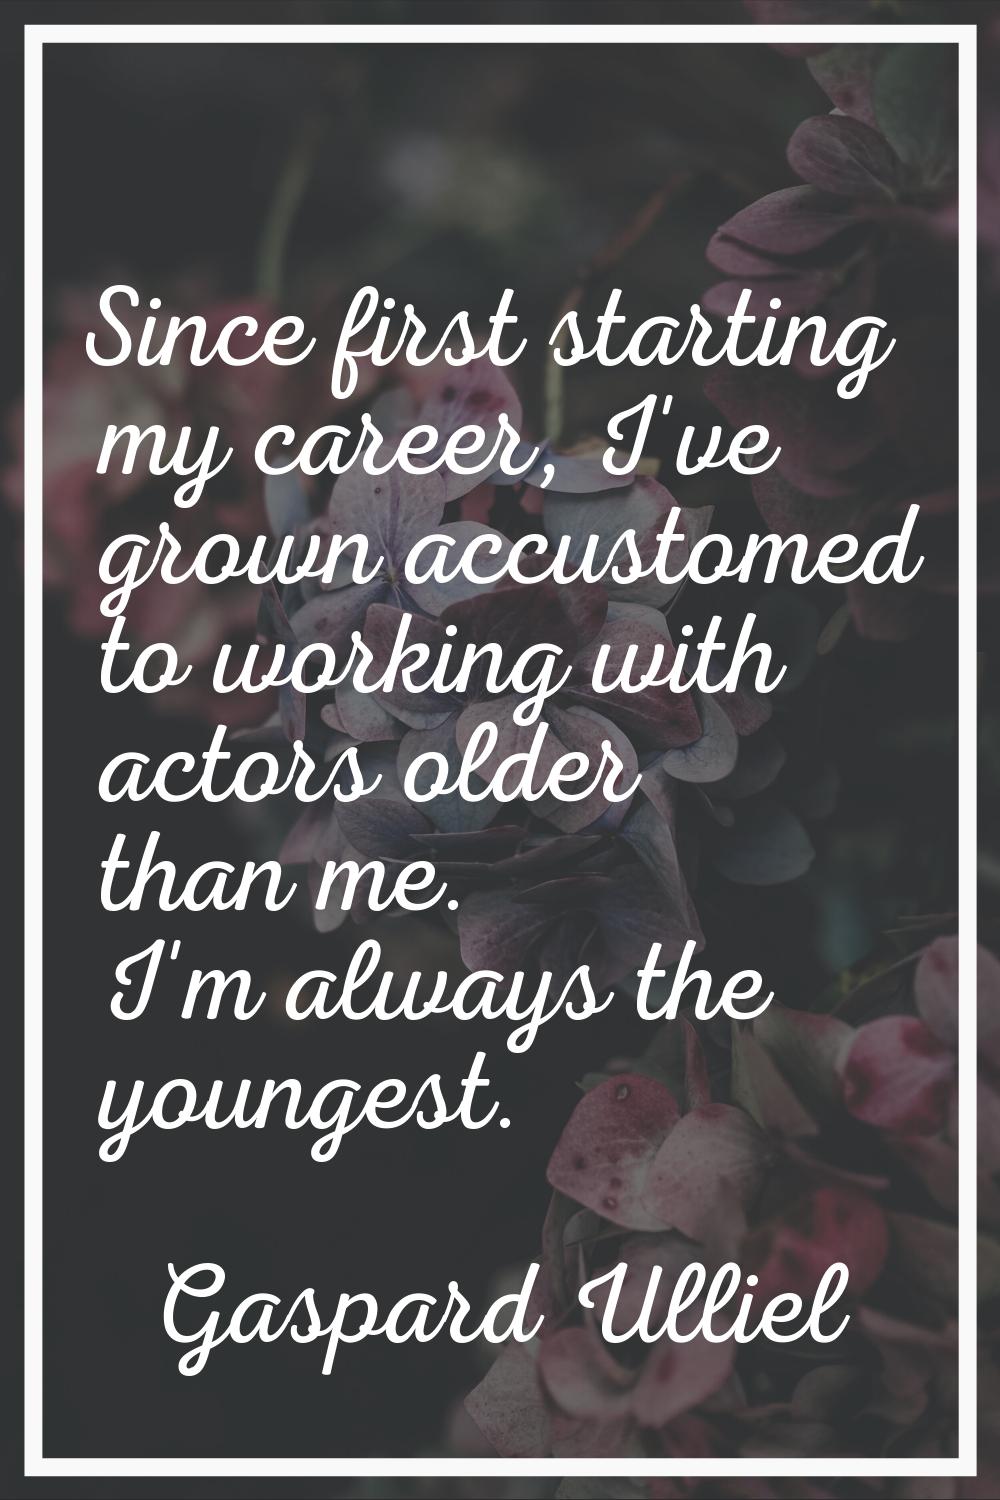 Since first starting my career, I've grown accustomed to working with actors older than me. I'm alw